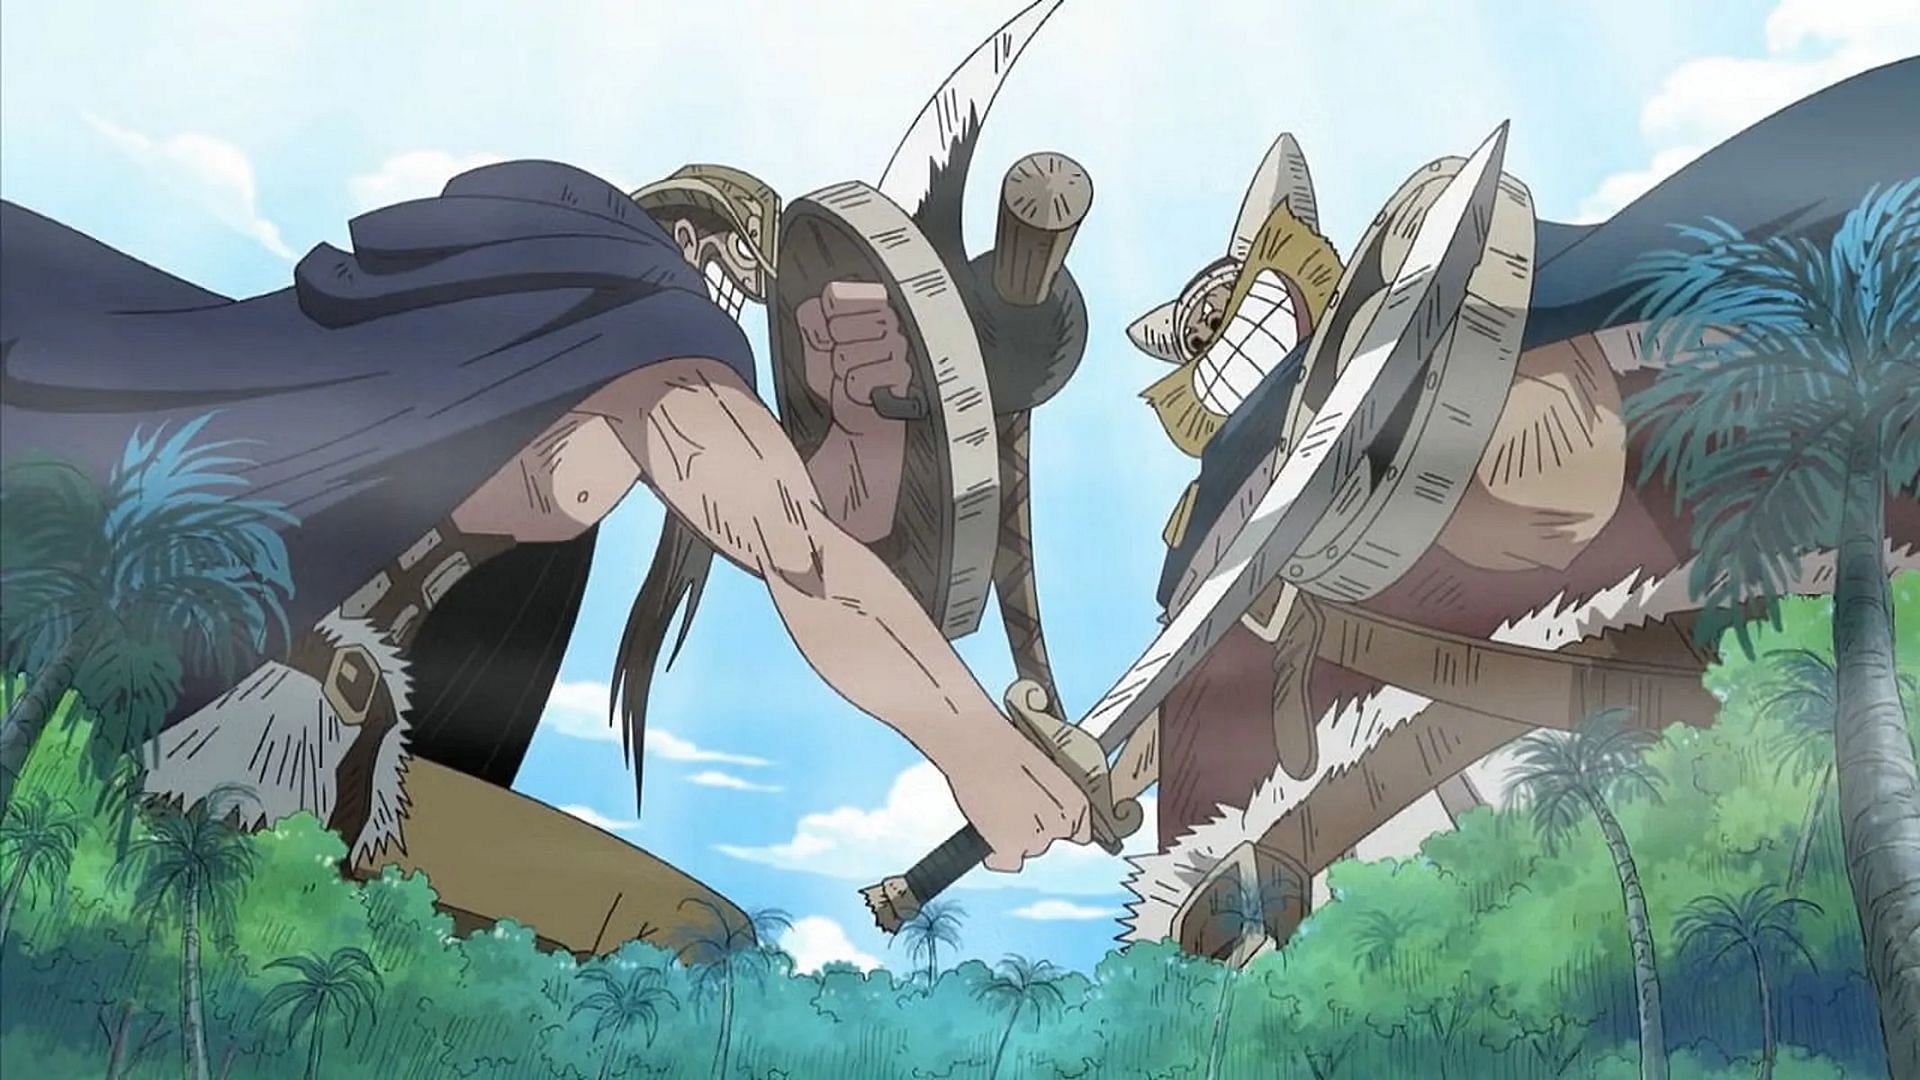 Dorry and Brogy started their duel 100 years ago (Image via Toei Animation, One Piece)